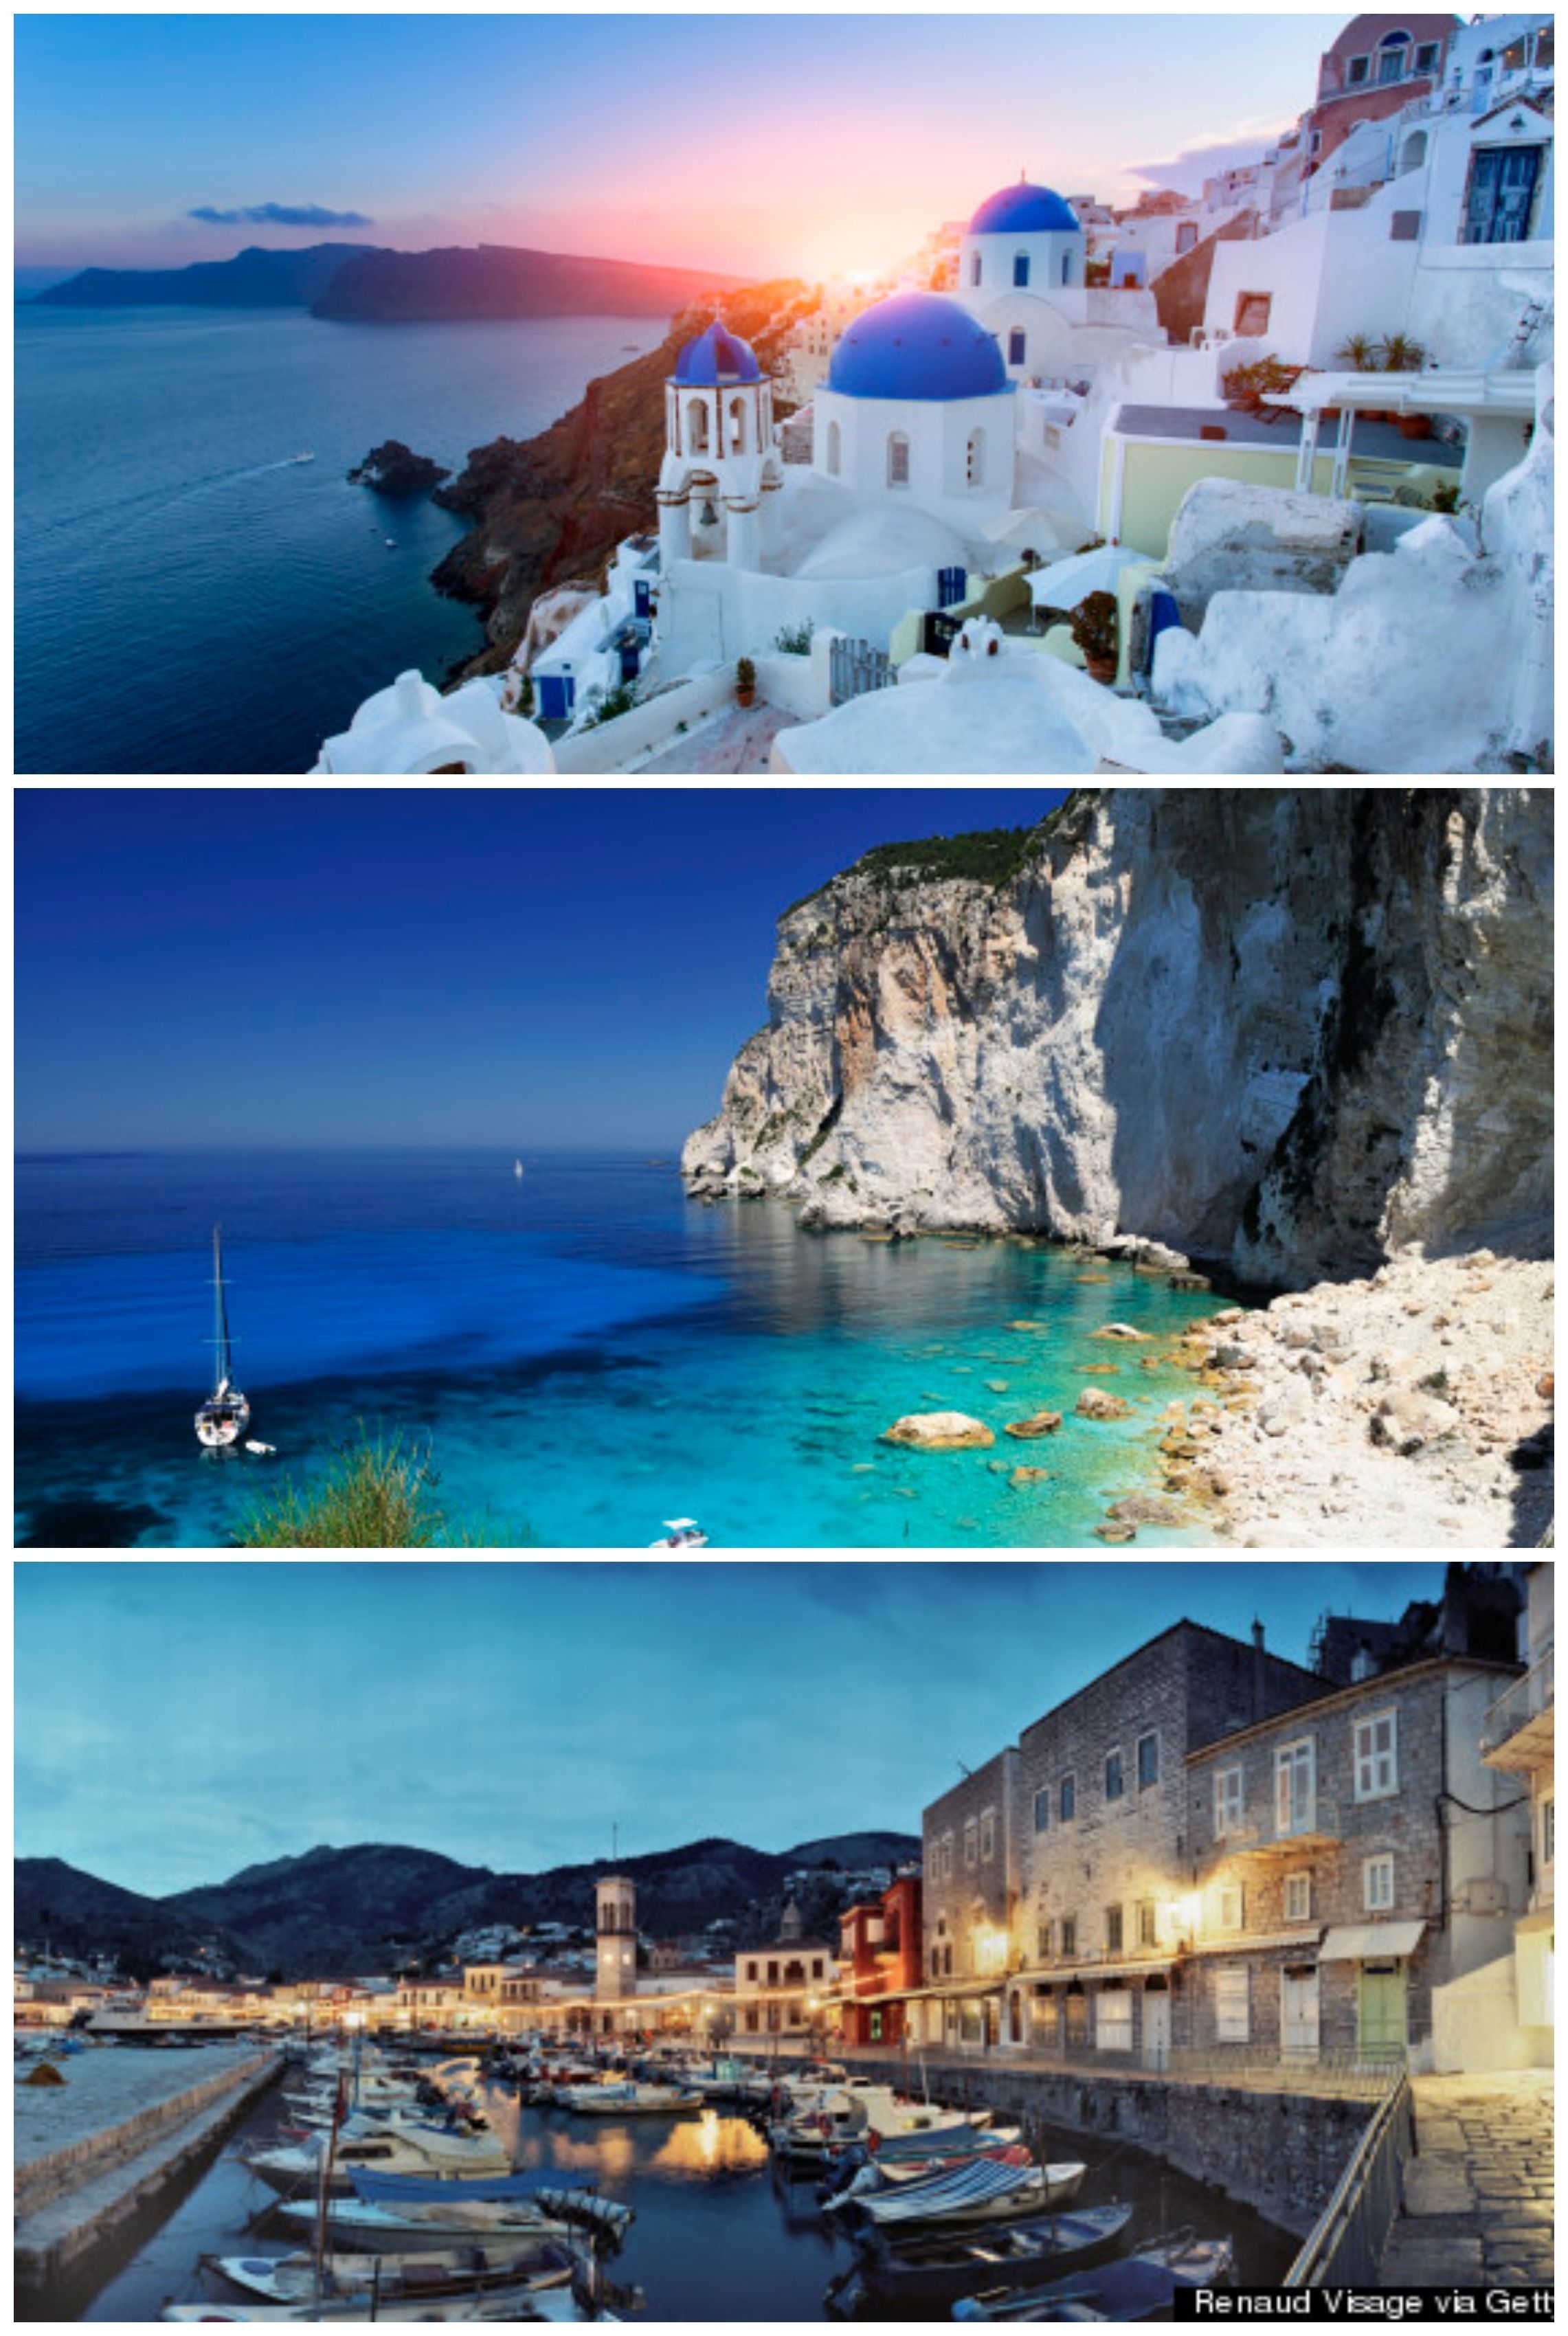 Travel to Greece this summe